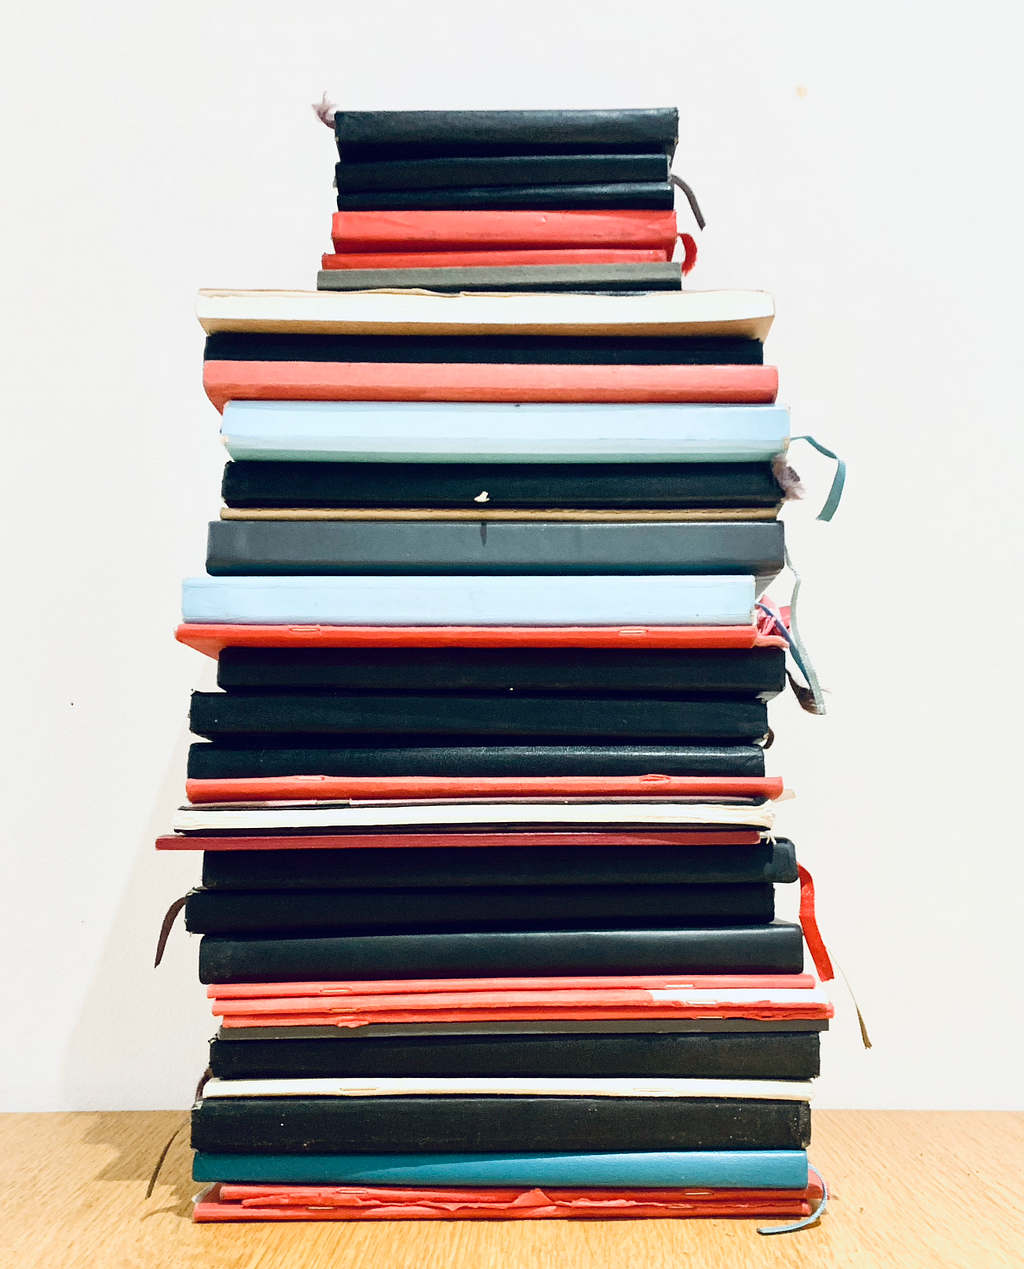 A stack of sketch books piled up in red, black and sky blue